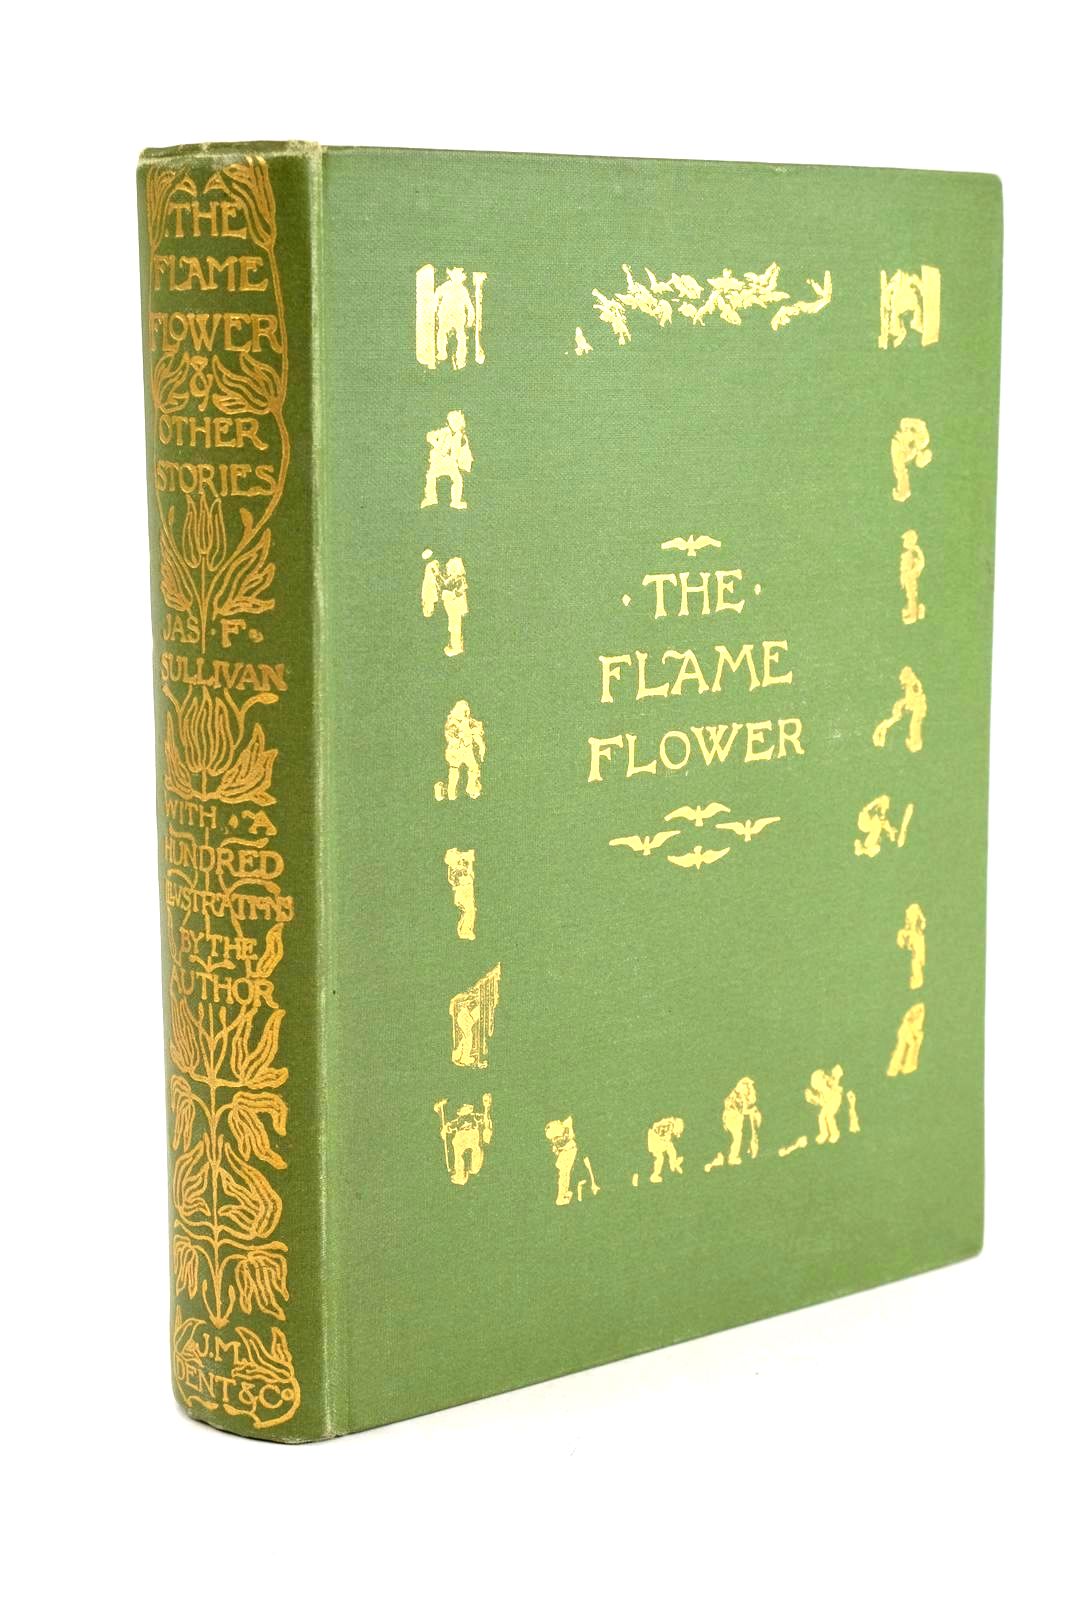 Photo of THE FLAME-FLOWER AND OTHER STORIES written by Sullivan, Jas. F. illustrated by Sullivan, Jas. F. published by J.M. Dent &amp; Co. (STOCK CODE: 1324242)  for sale by Stella & Rose's Books